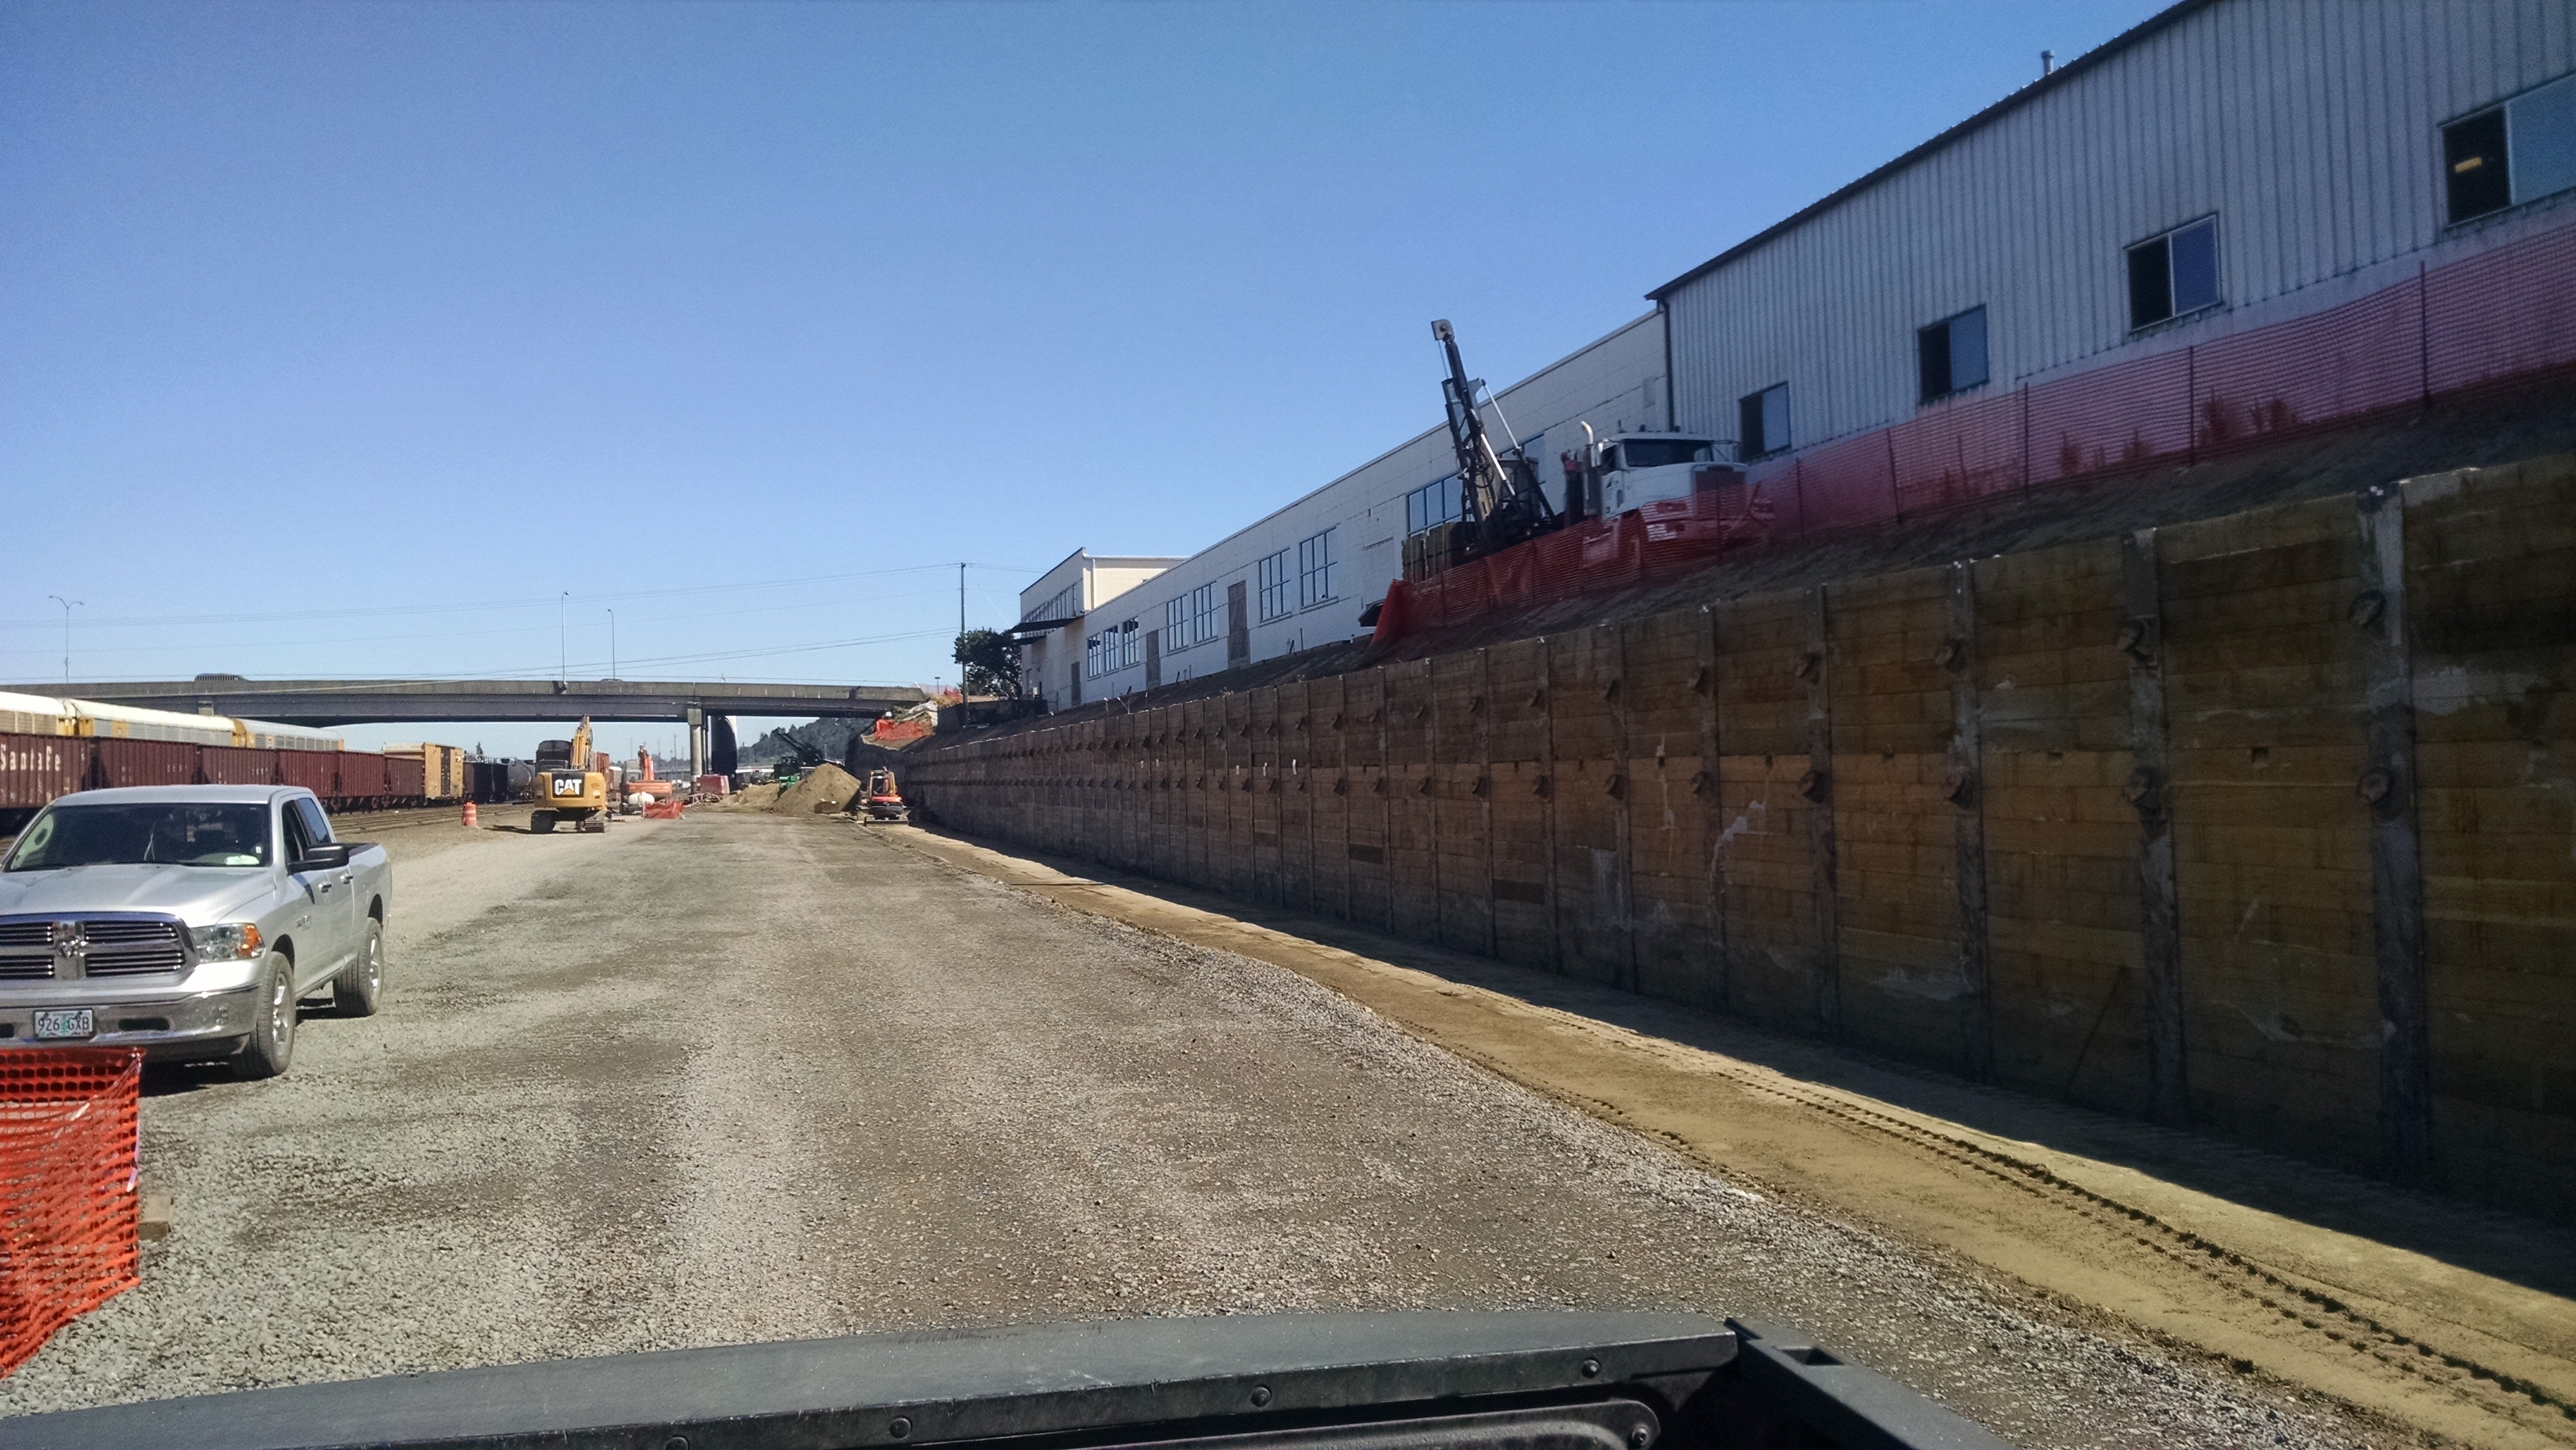 BNSF Vancouver Bypass Project, Task 3